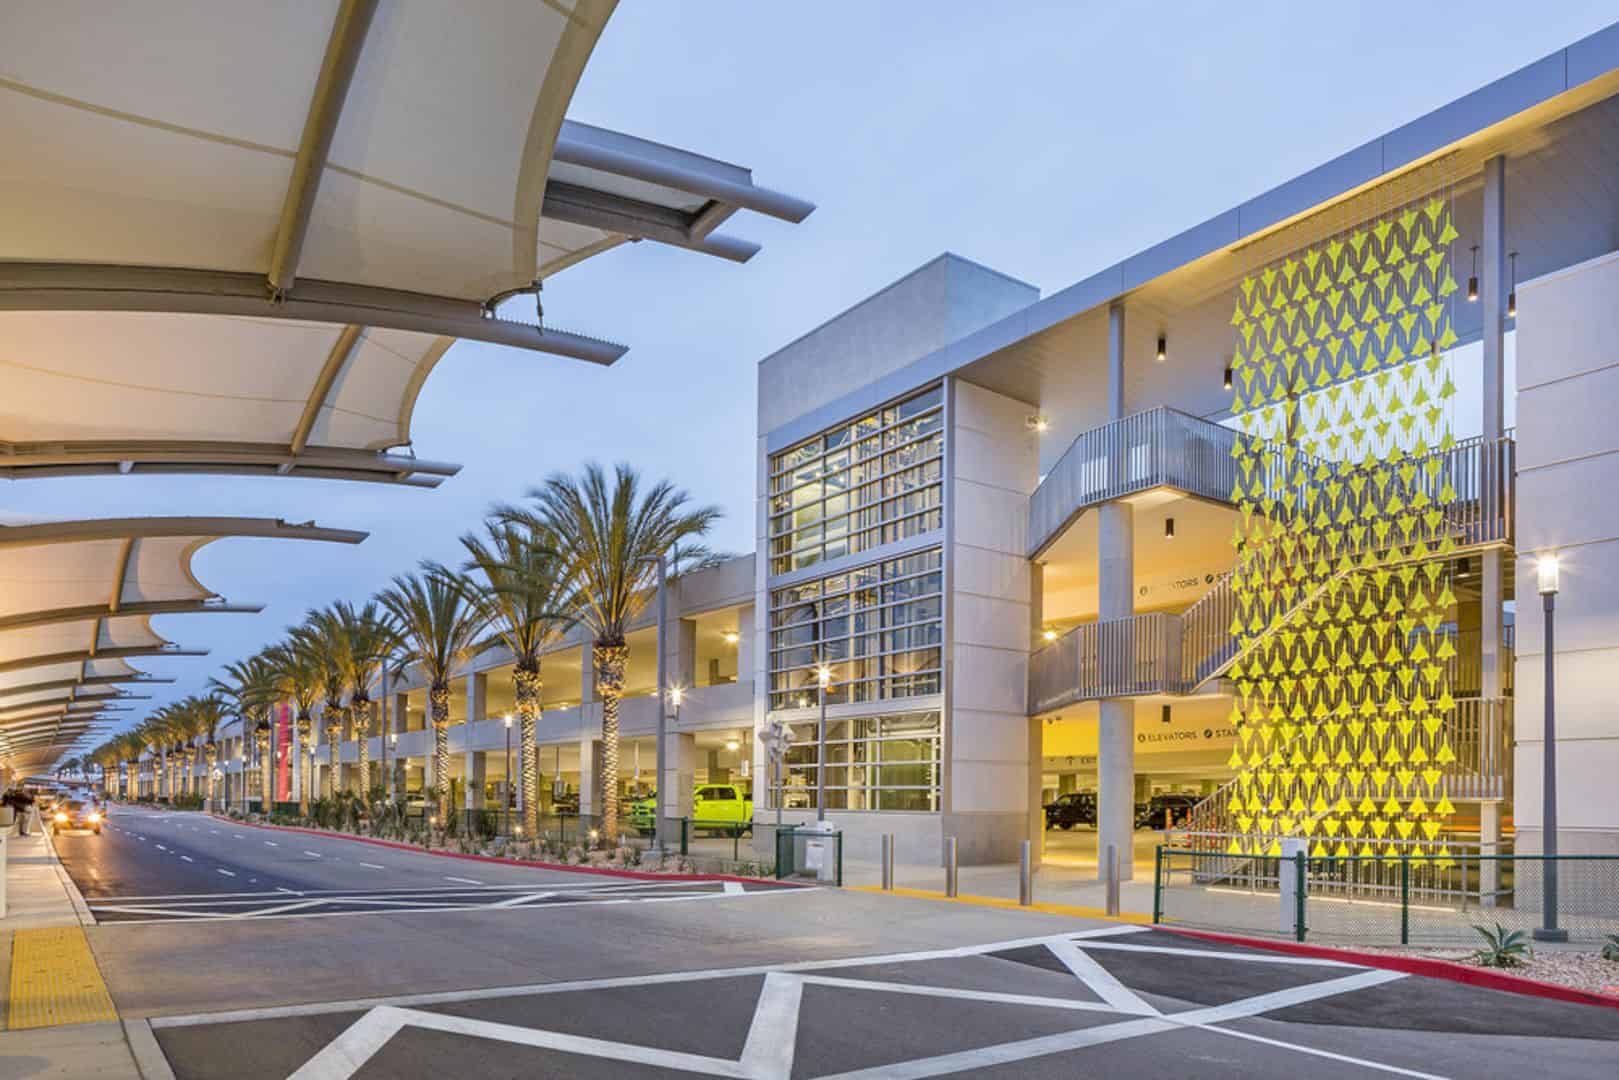 Formation Vibrant Colors And Energetic Patterns Façade For San Diego International Airports Parking 16